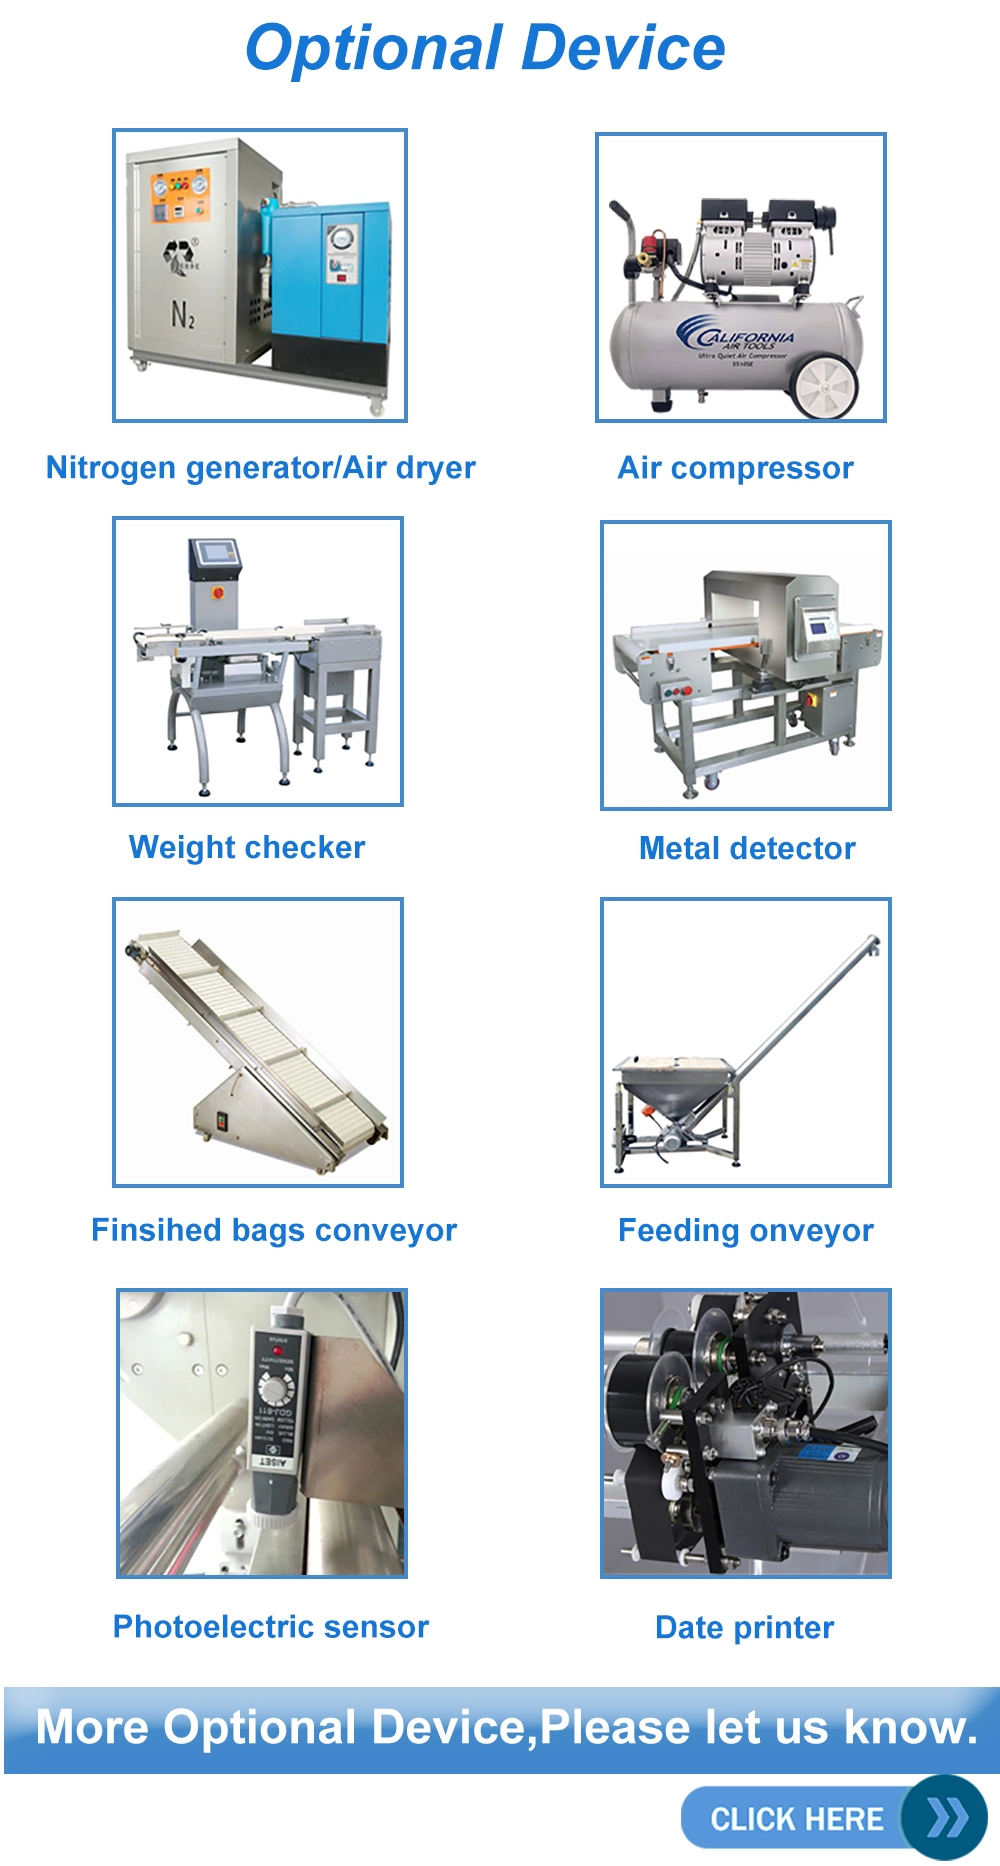 10 Head Weigher Vffs Pouch Packing Machine for Packaging Seeds/Cereal/Oat/Freeze-Dried Mushrooms